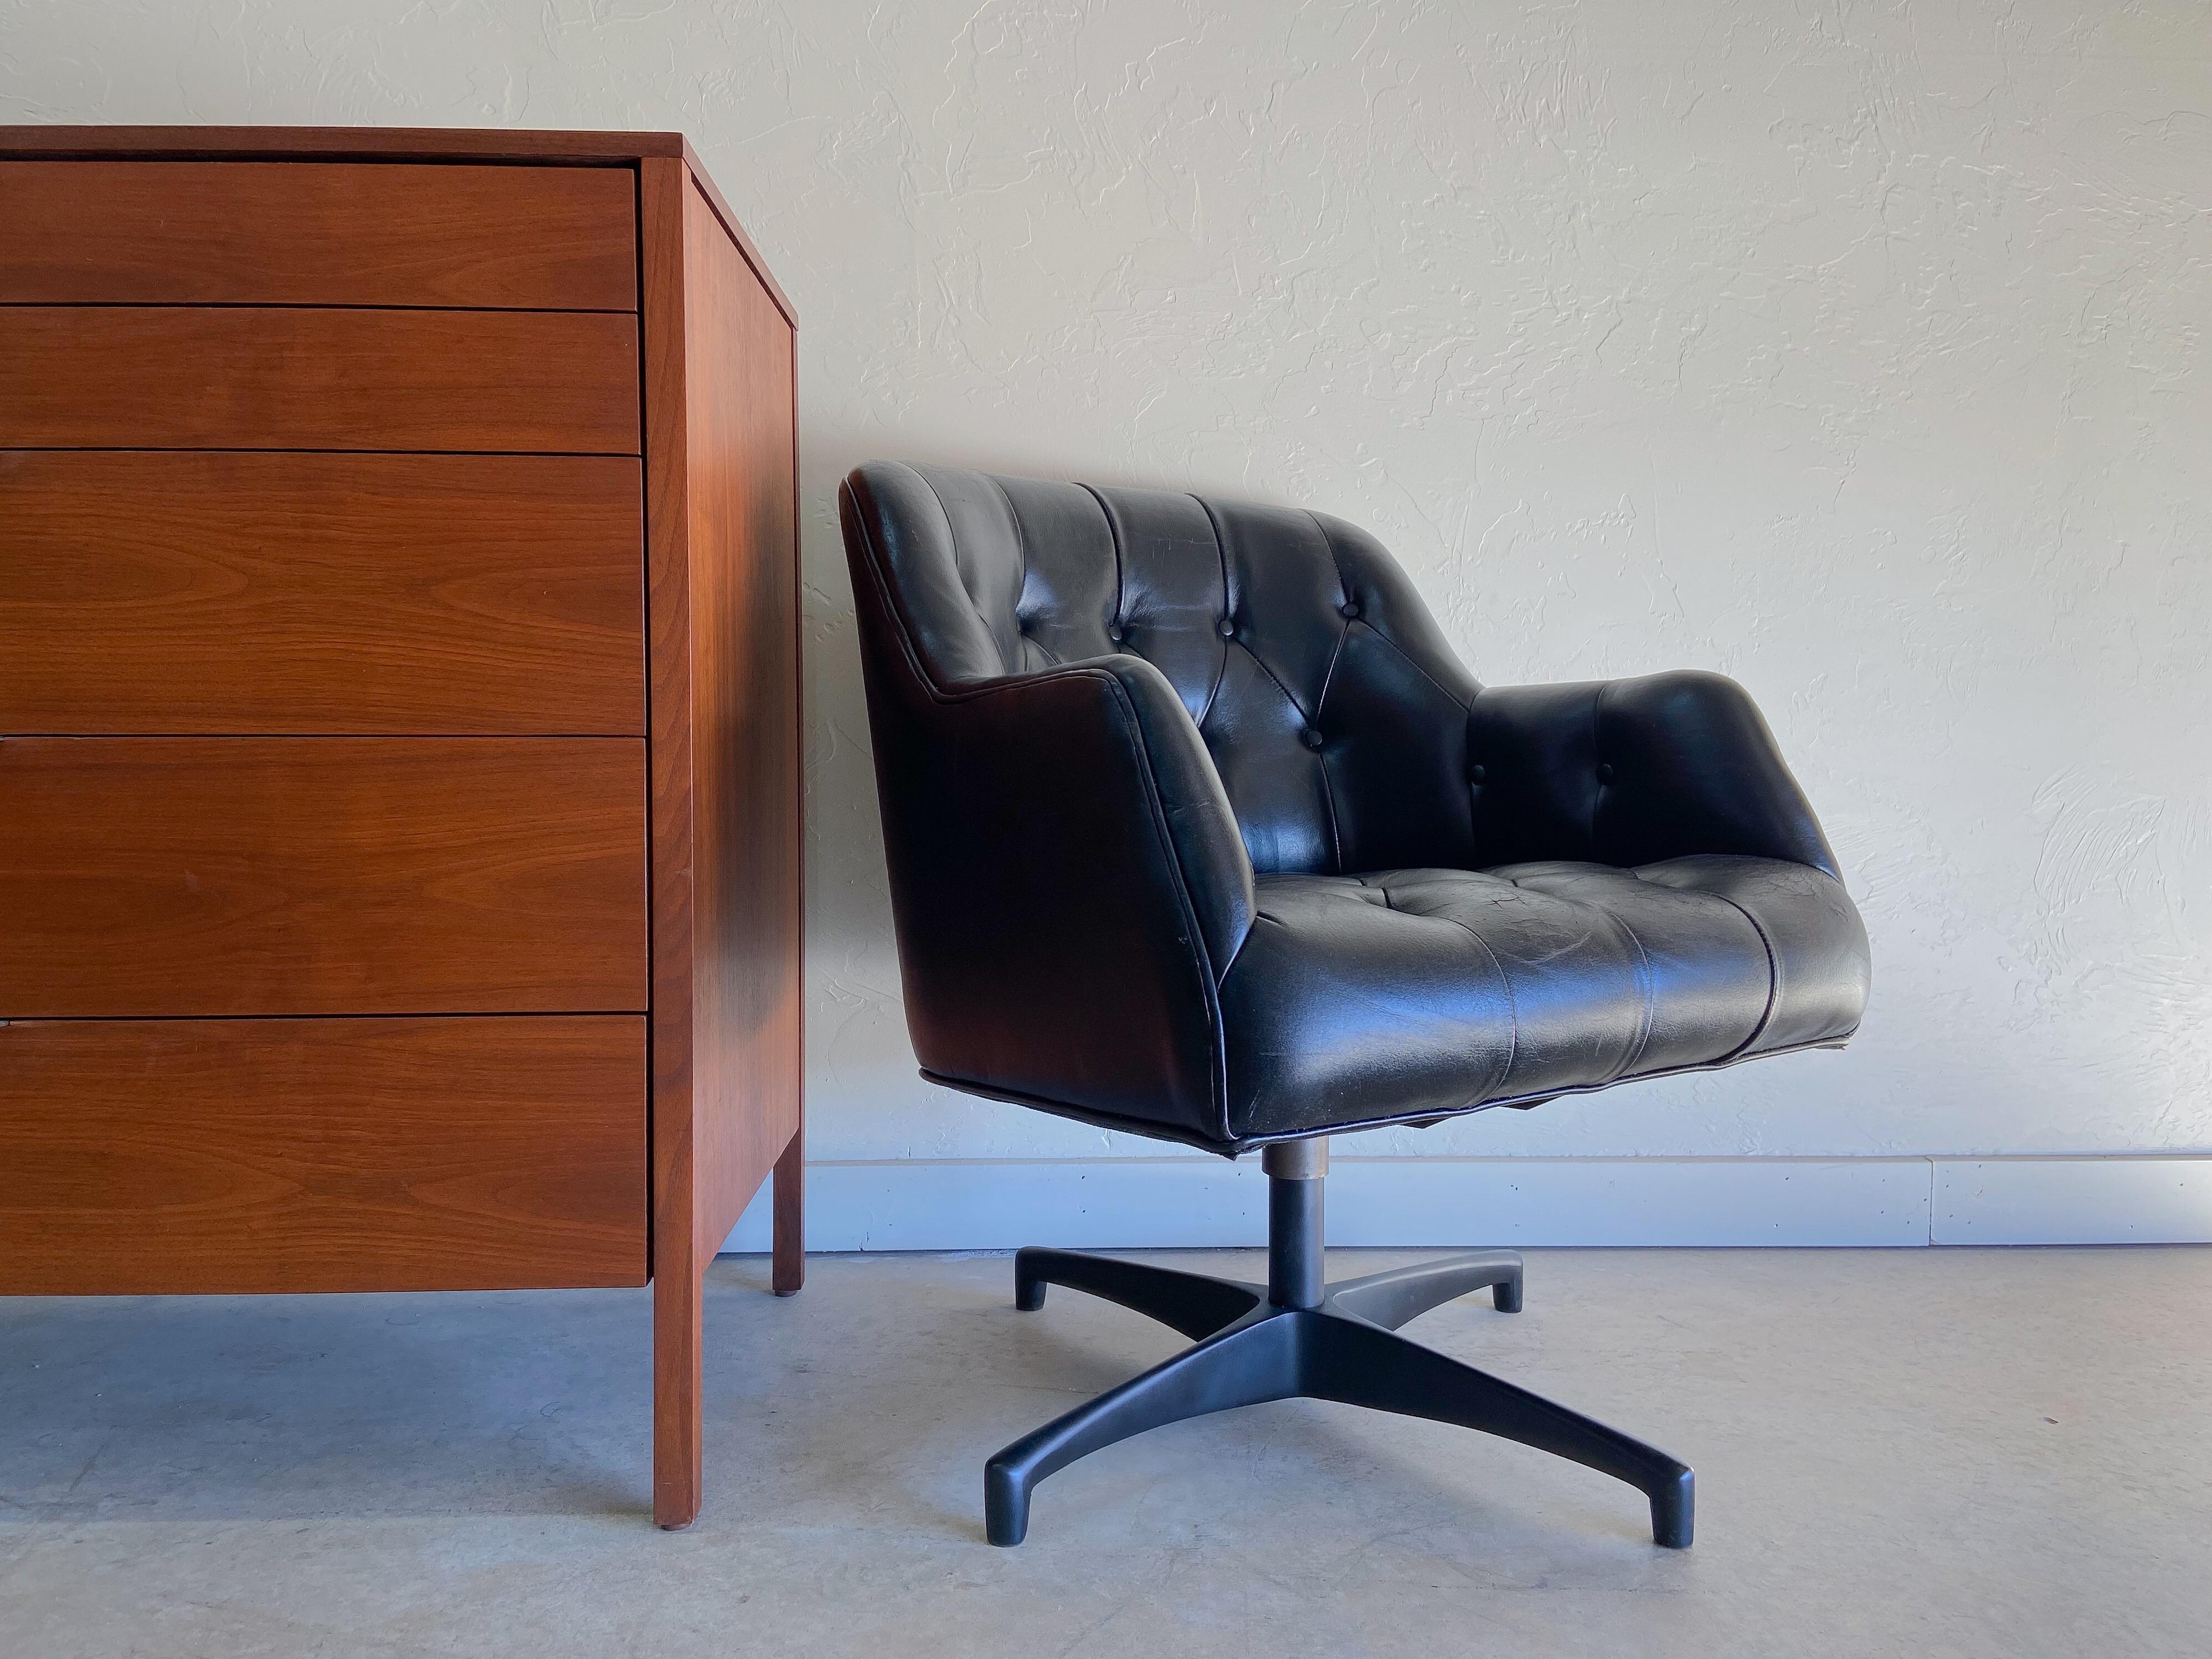 A wonderful vintage button tufted leather chair designed by Jens Risom and manufactured by B.L. Marble.

Featuring black leather upholstery that has developed a wonderful patina over the years. 

This is a great representation of Mid-Century